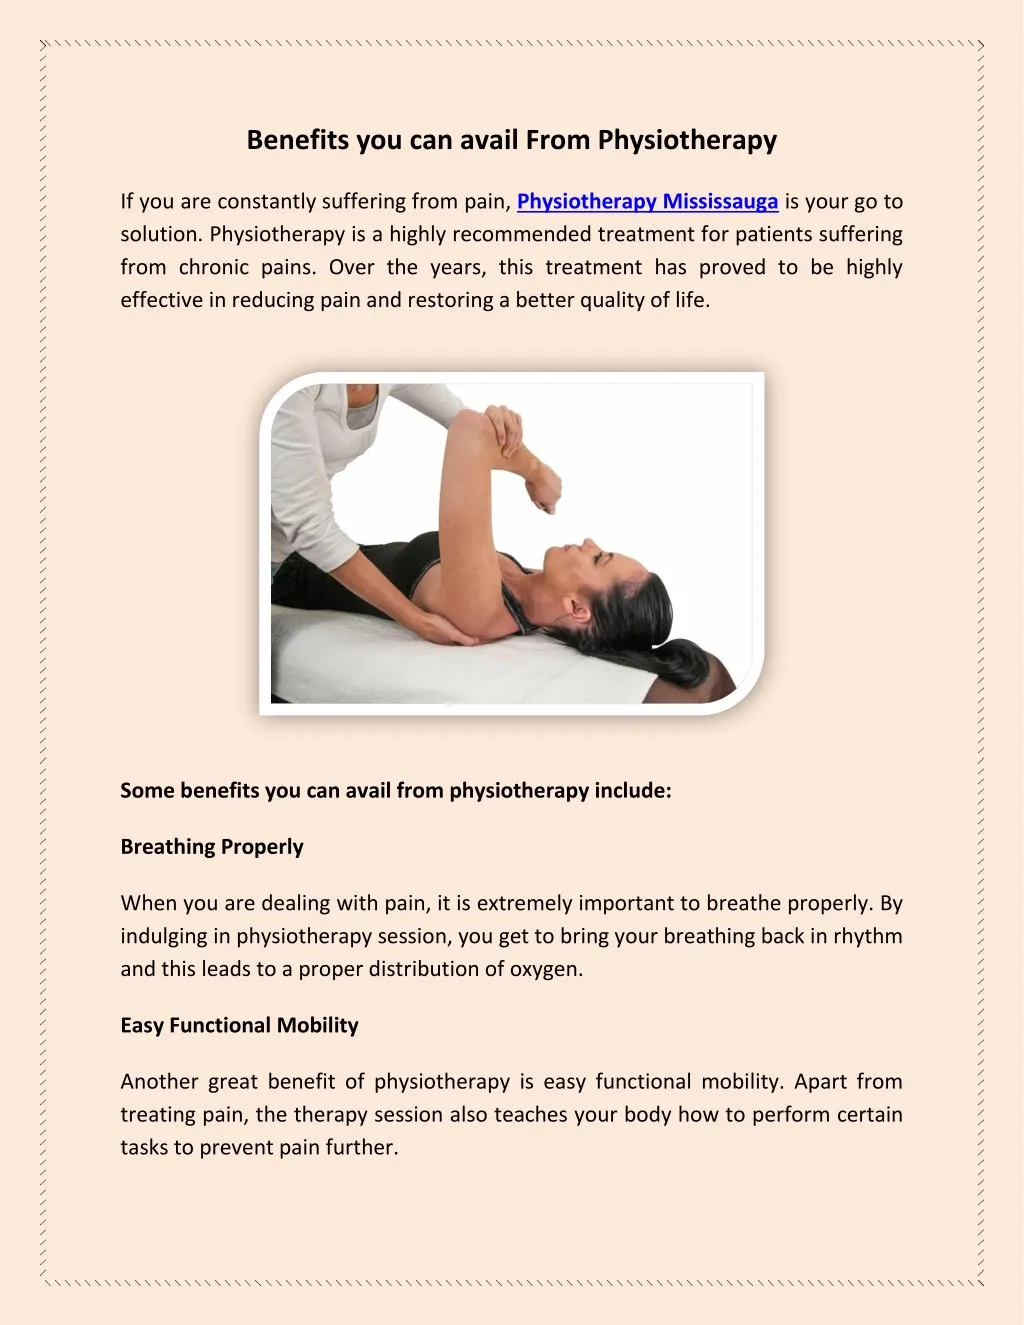 benefits you can avail from physiotherapy